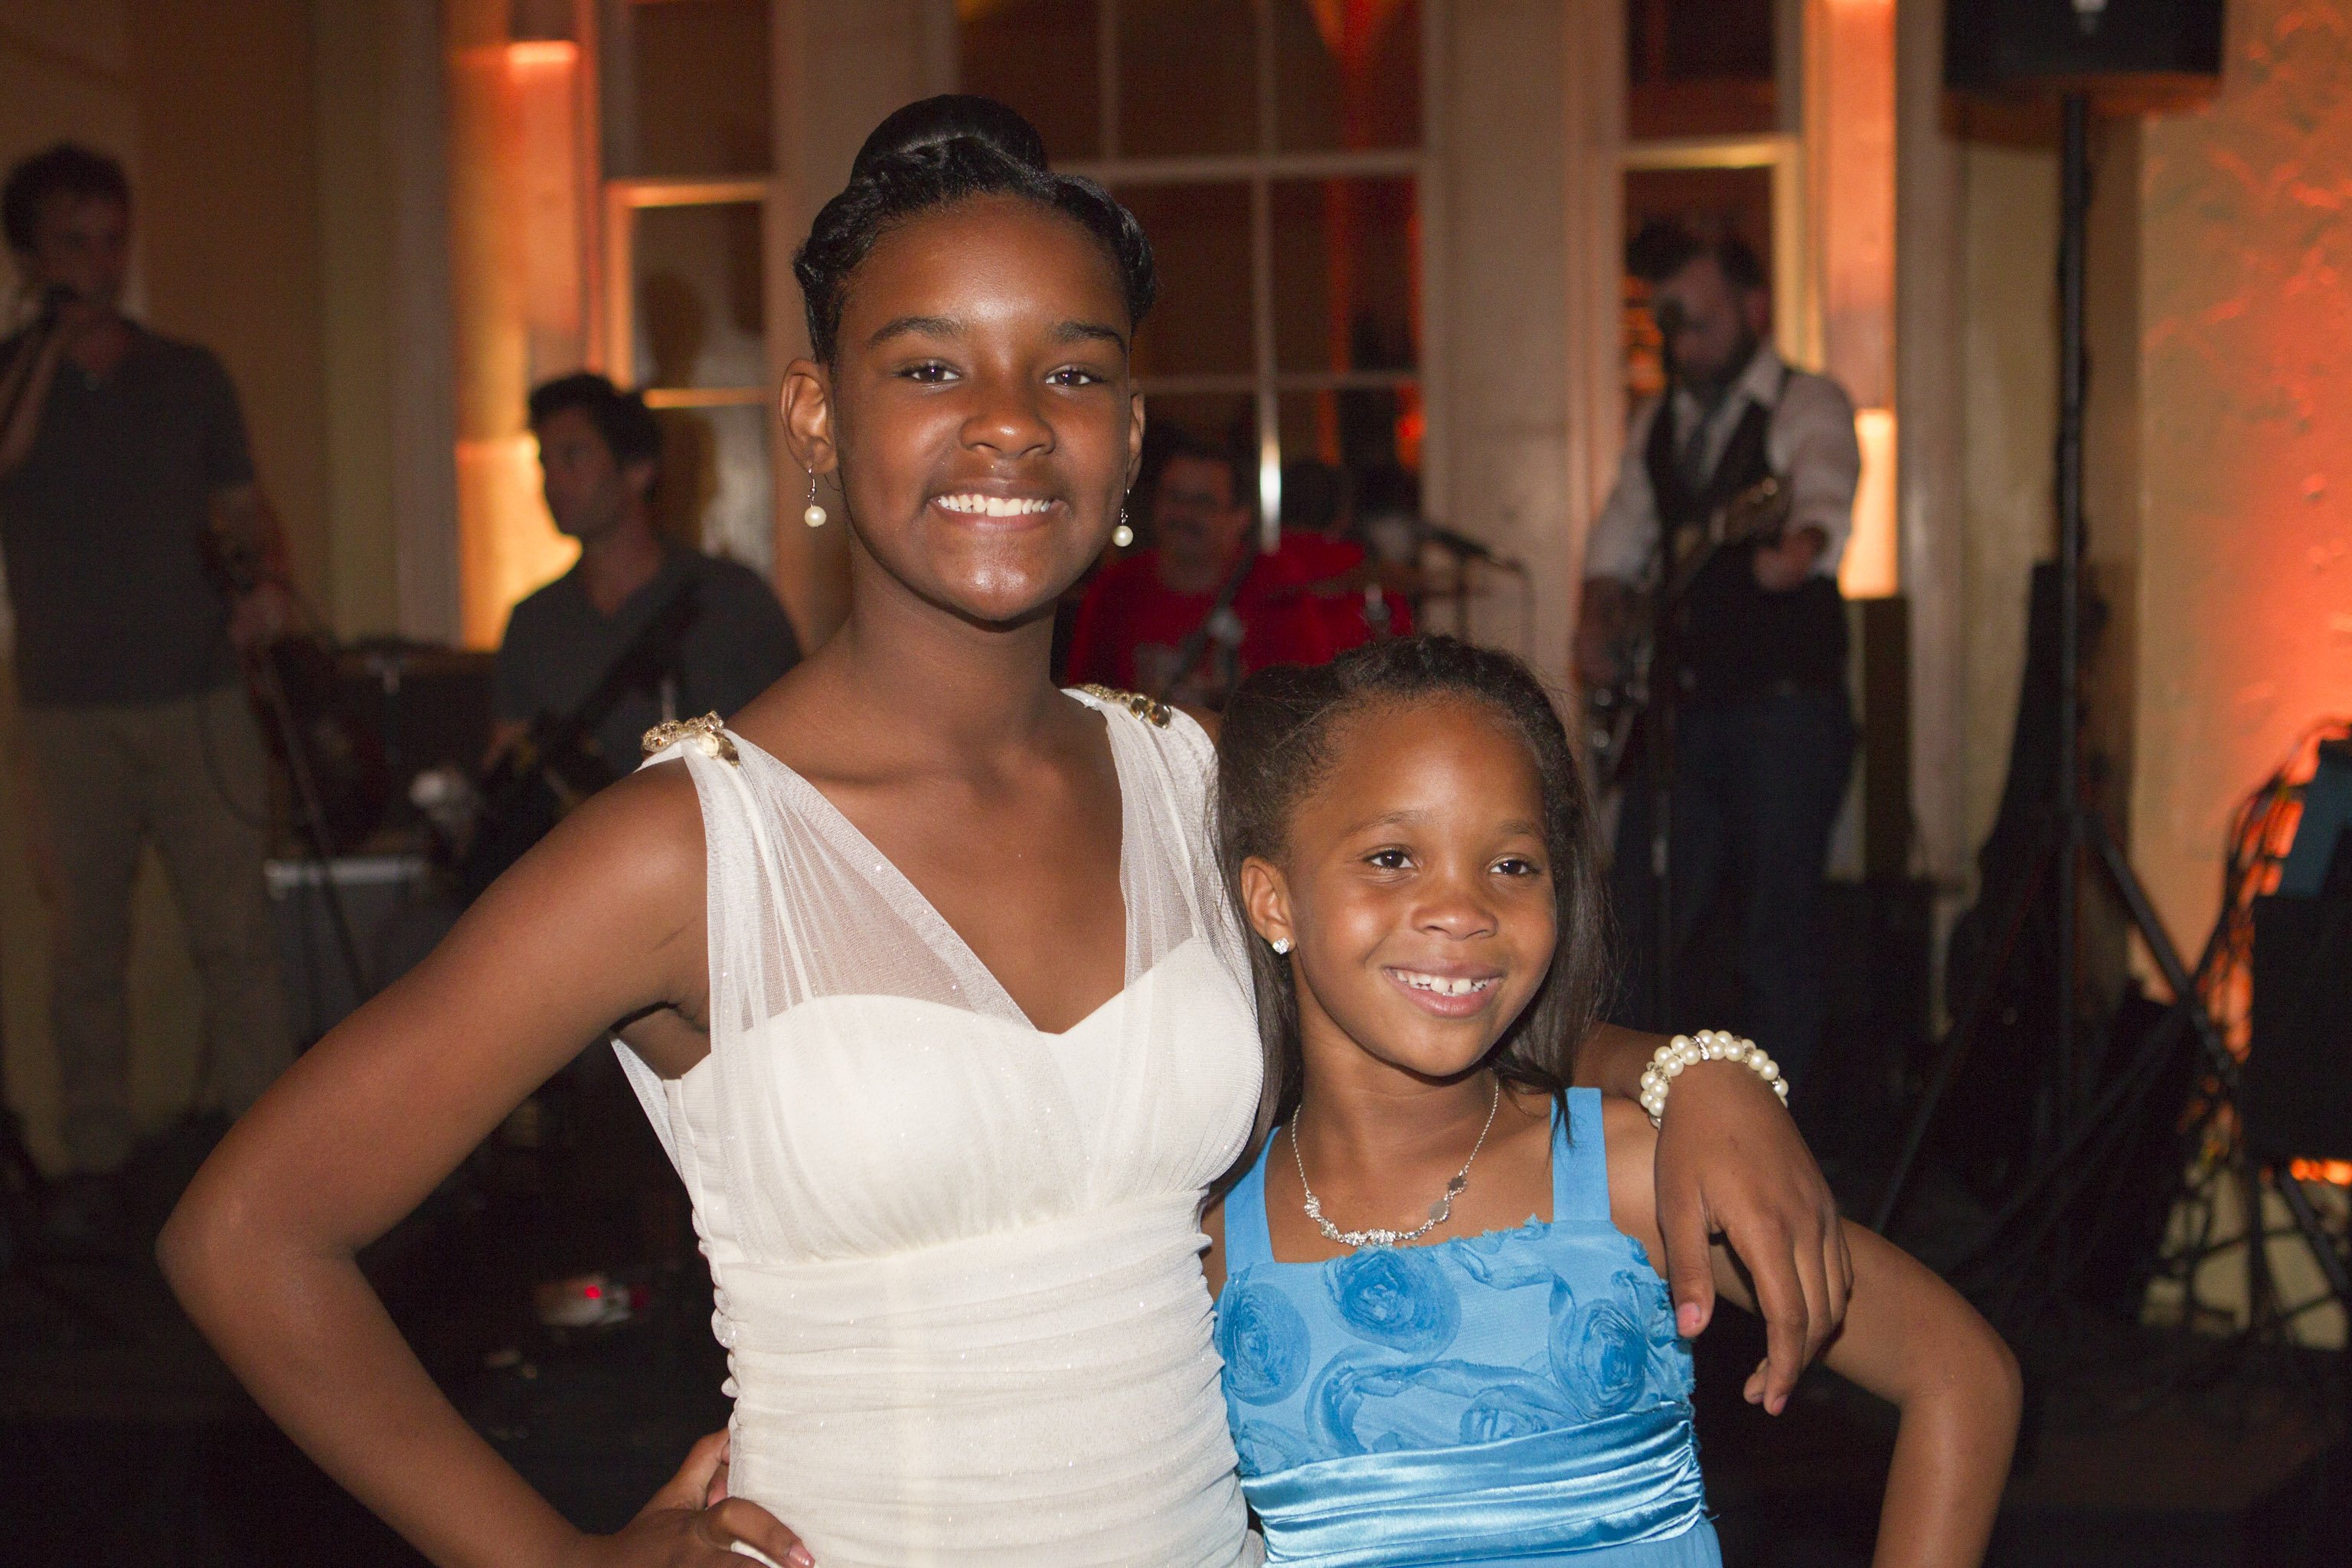 Actresses Jonshel Alexander and Quvenzhane Wallis on the dance floor at Fox Searchlight Pictures Presents "Beasts of the Southern Wild" After Party on June 25, 2012 in New Orleans, Louisiana | Getty Images